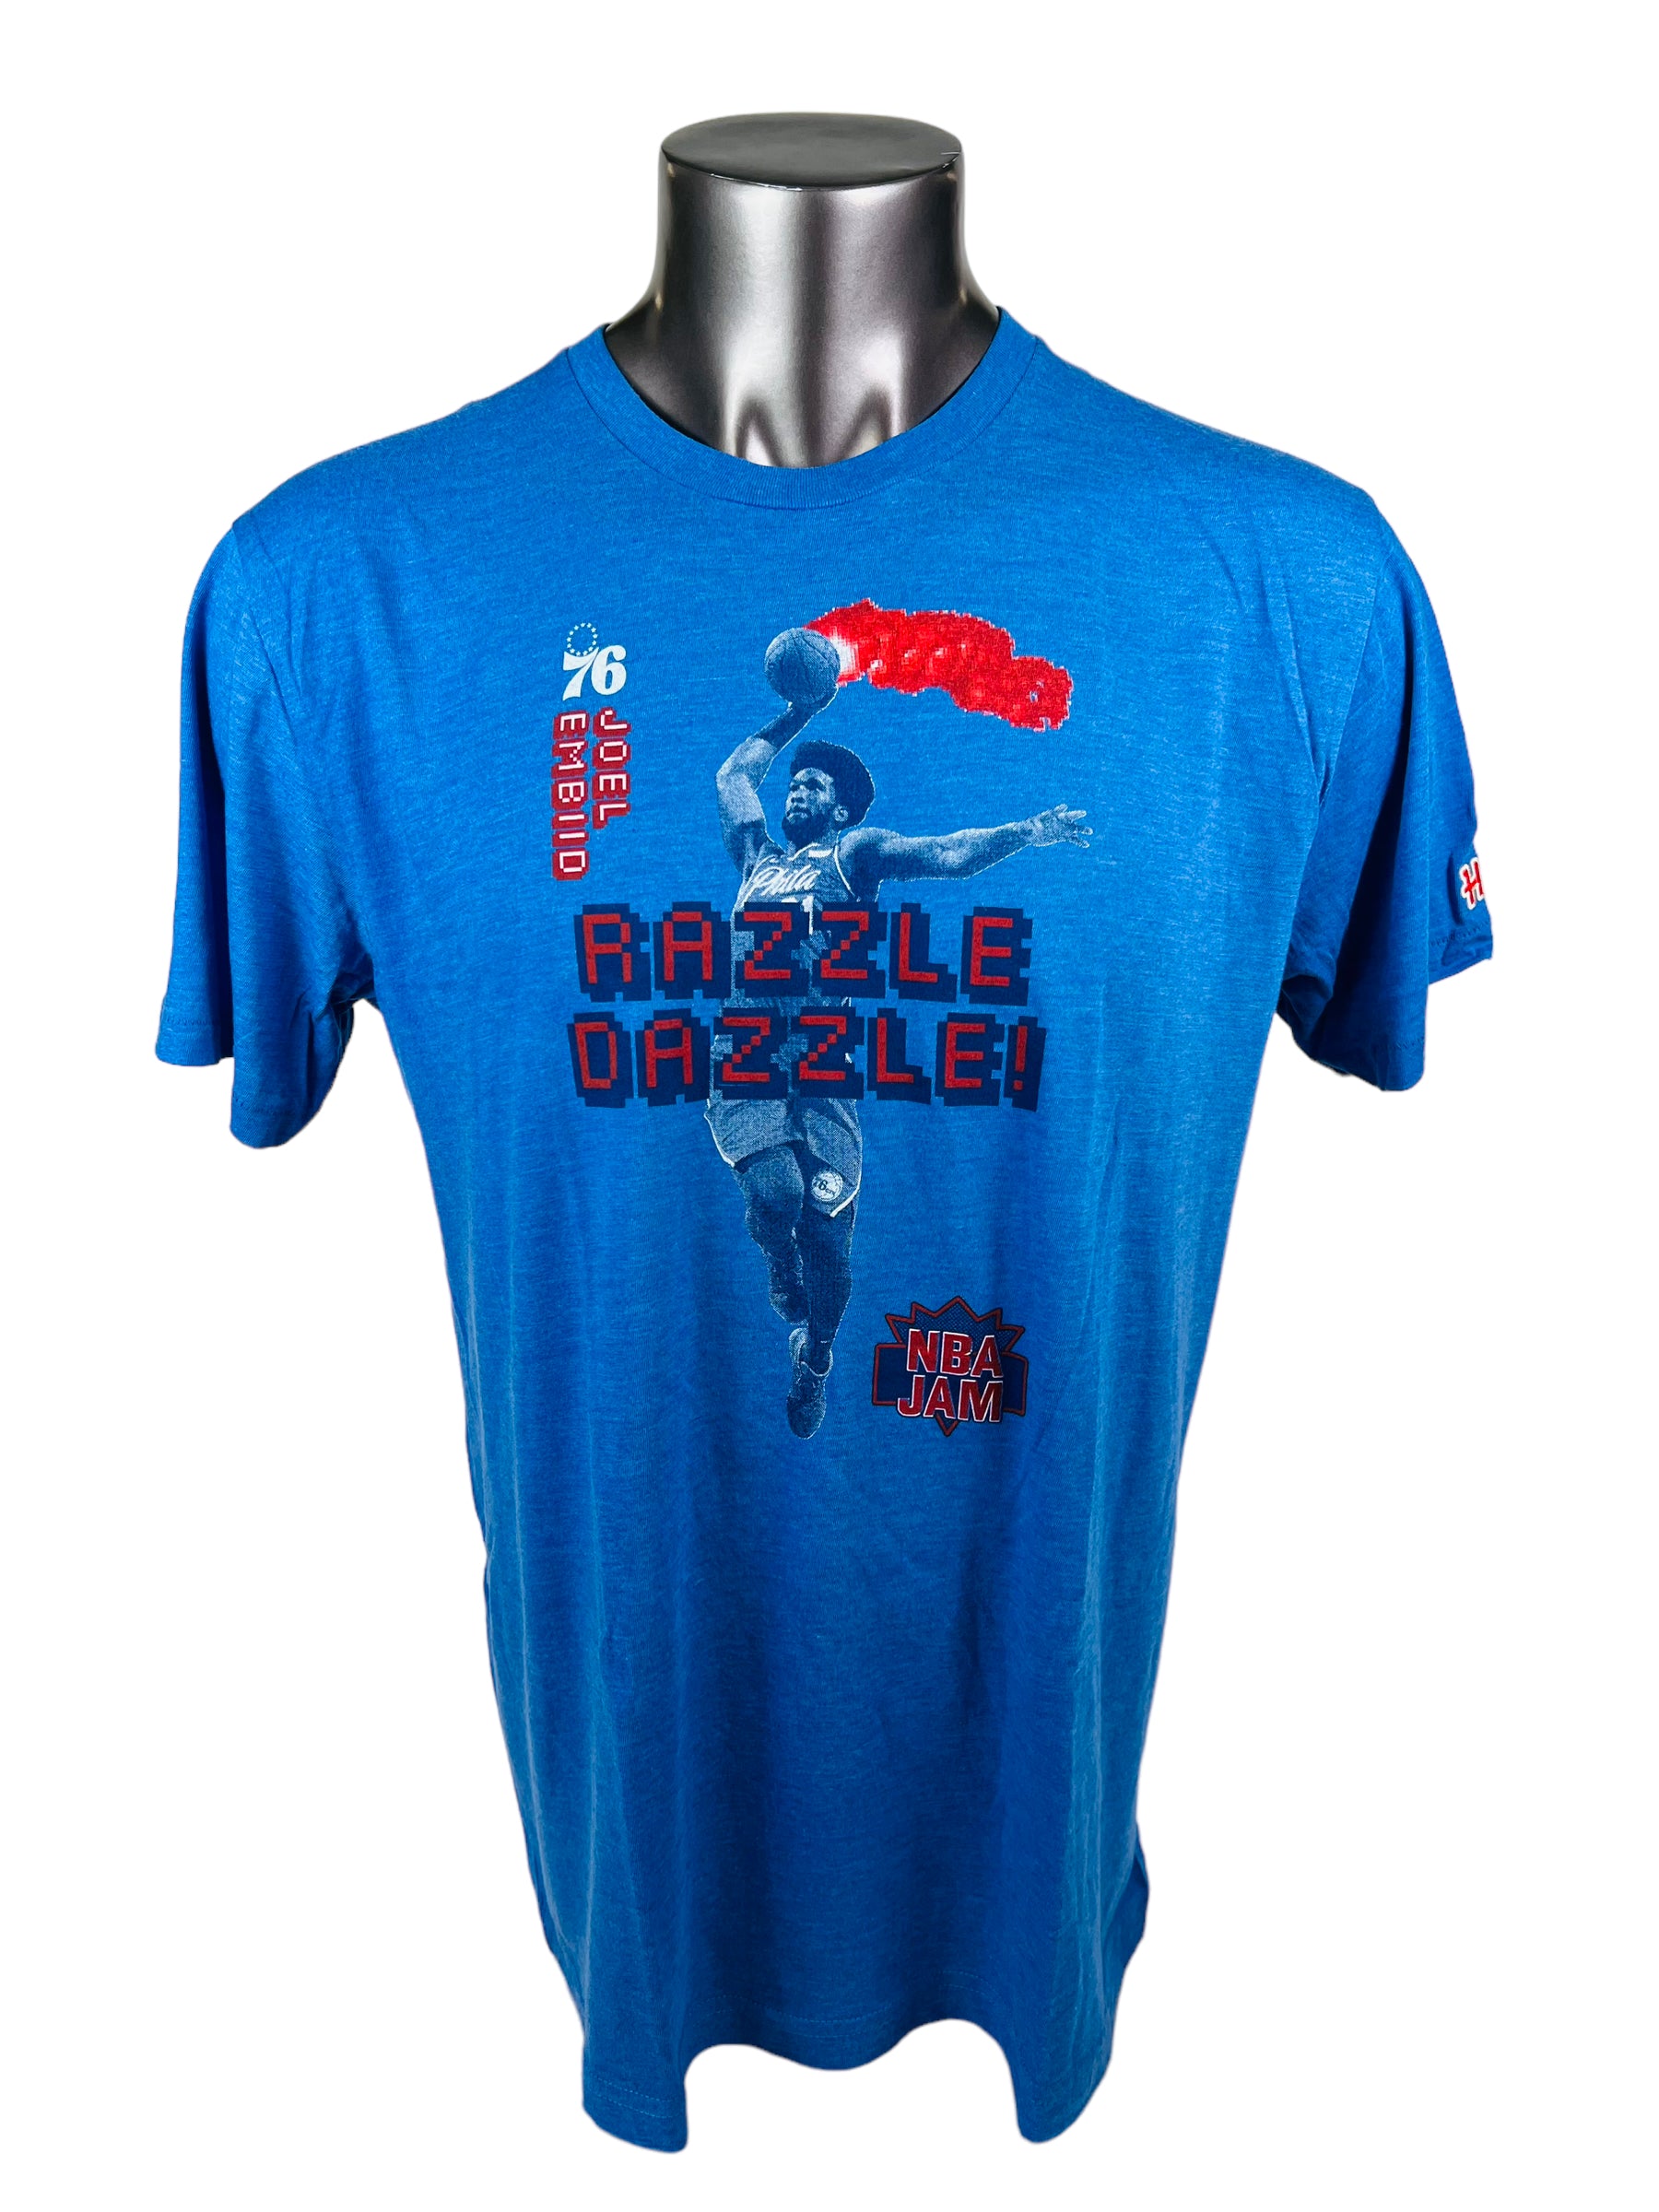 Cleveland Jim Thome Signature Jersey T-Shirt from Homage. | Ash | Vintage Apparel from Homage.